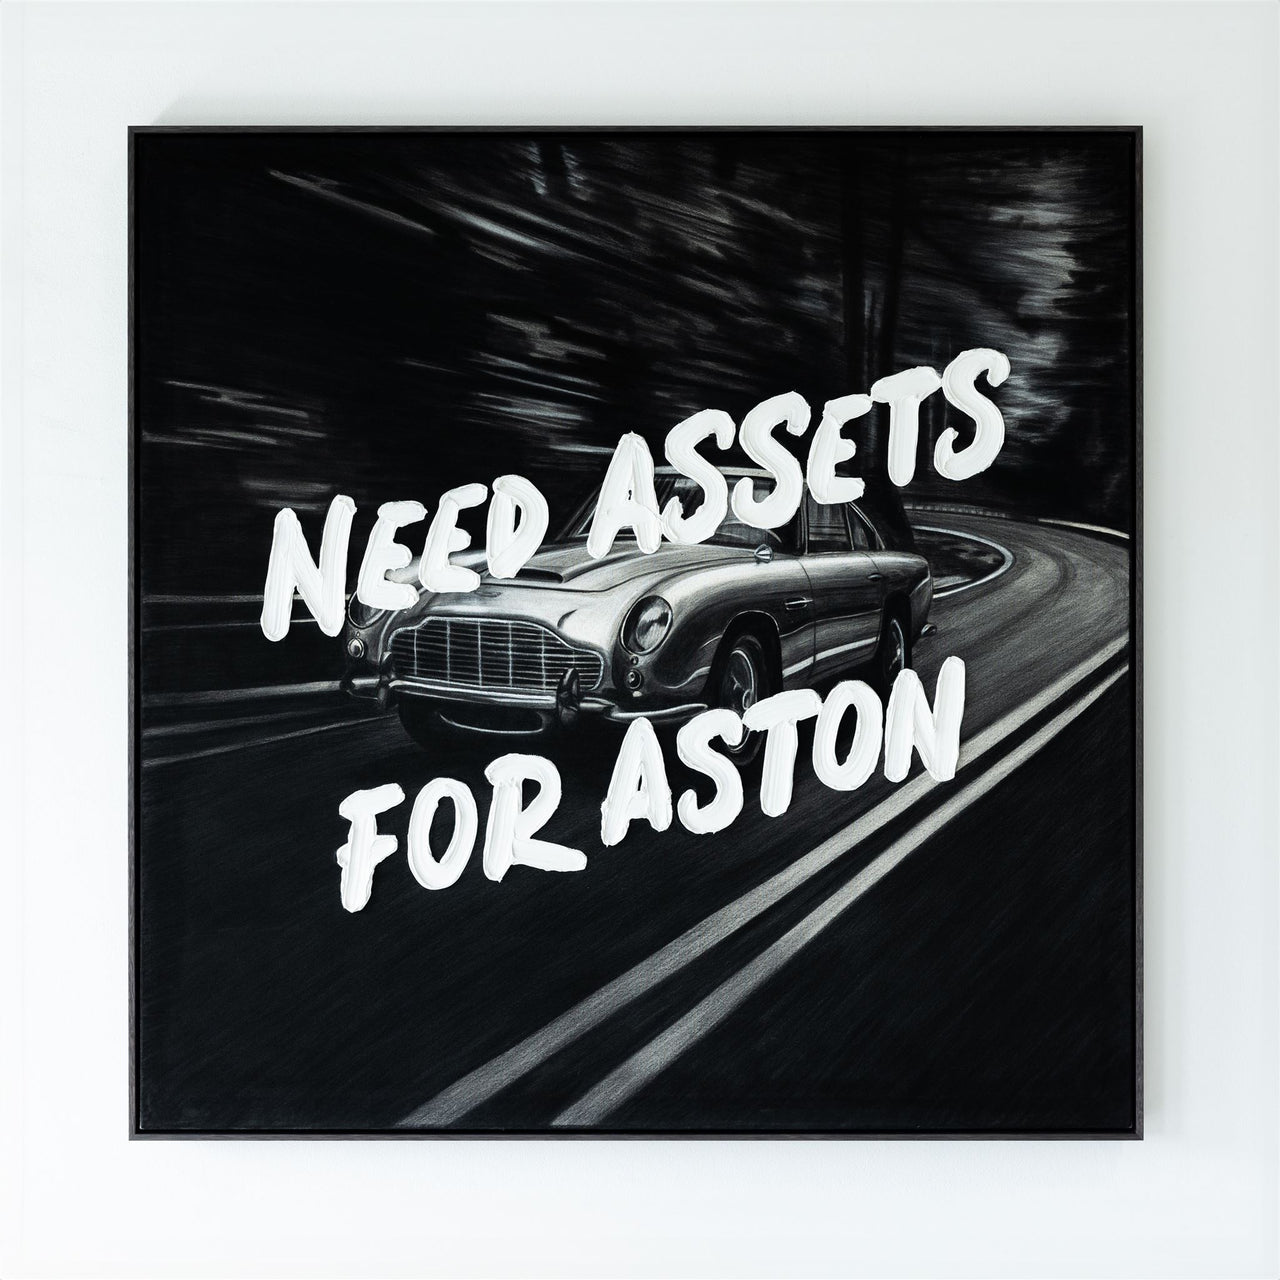 NEED ASSETS FOR ASTON